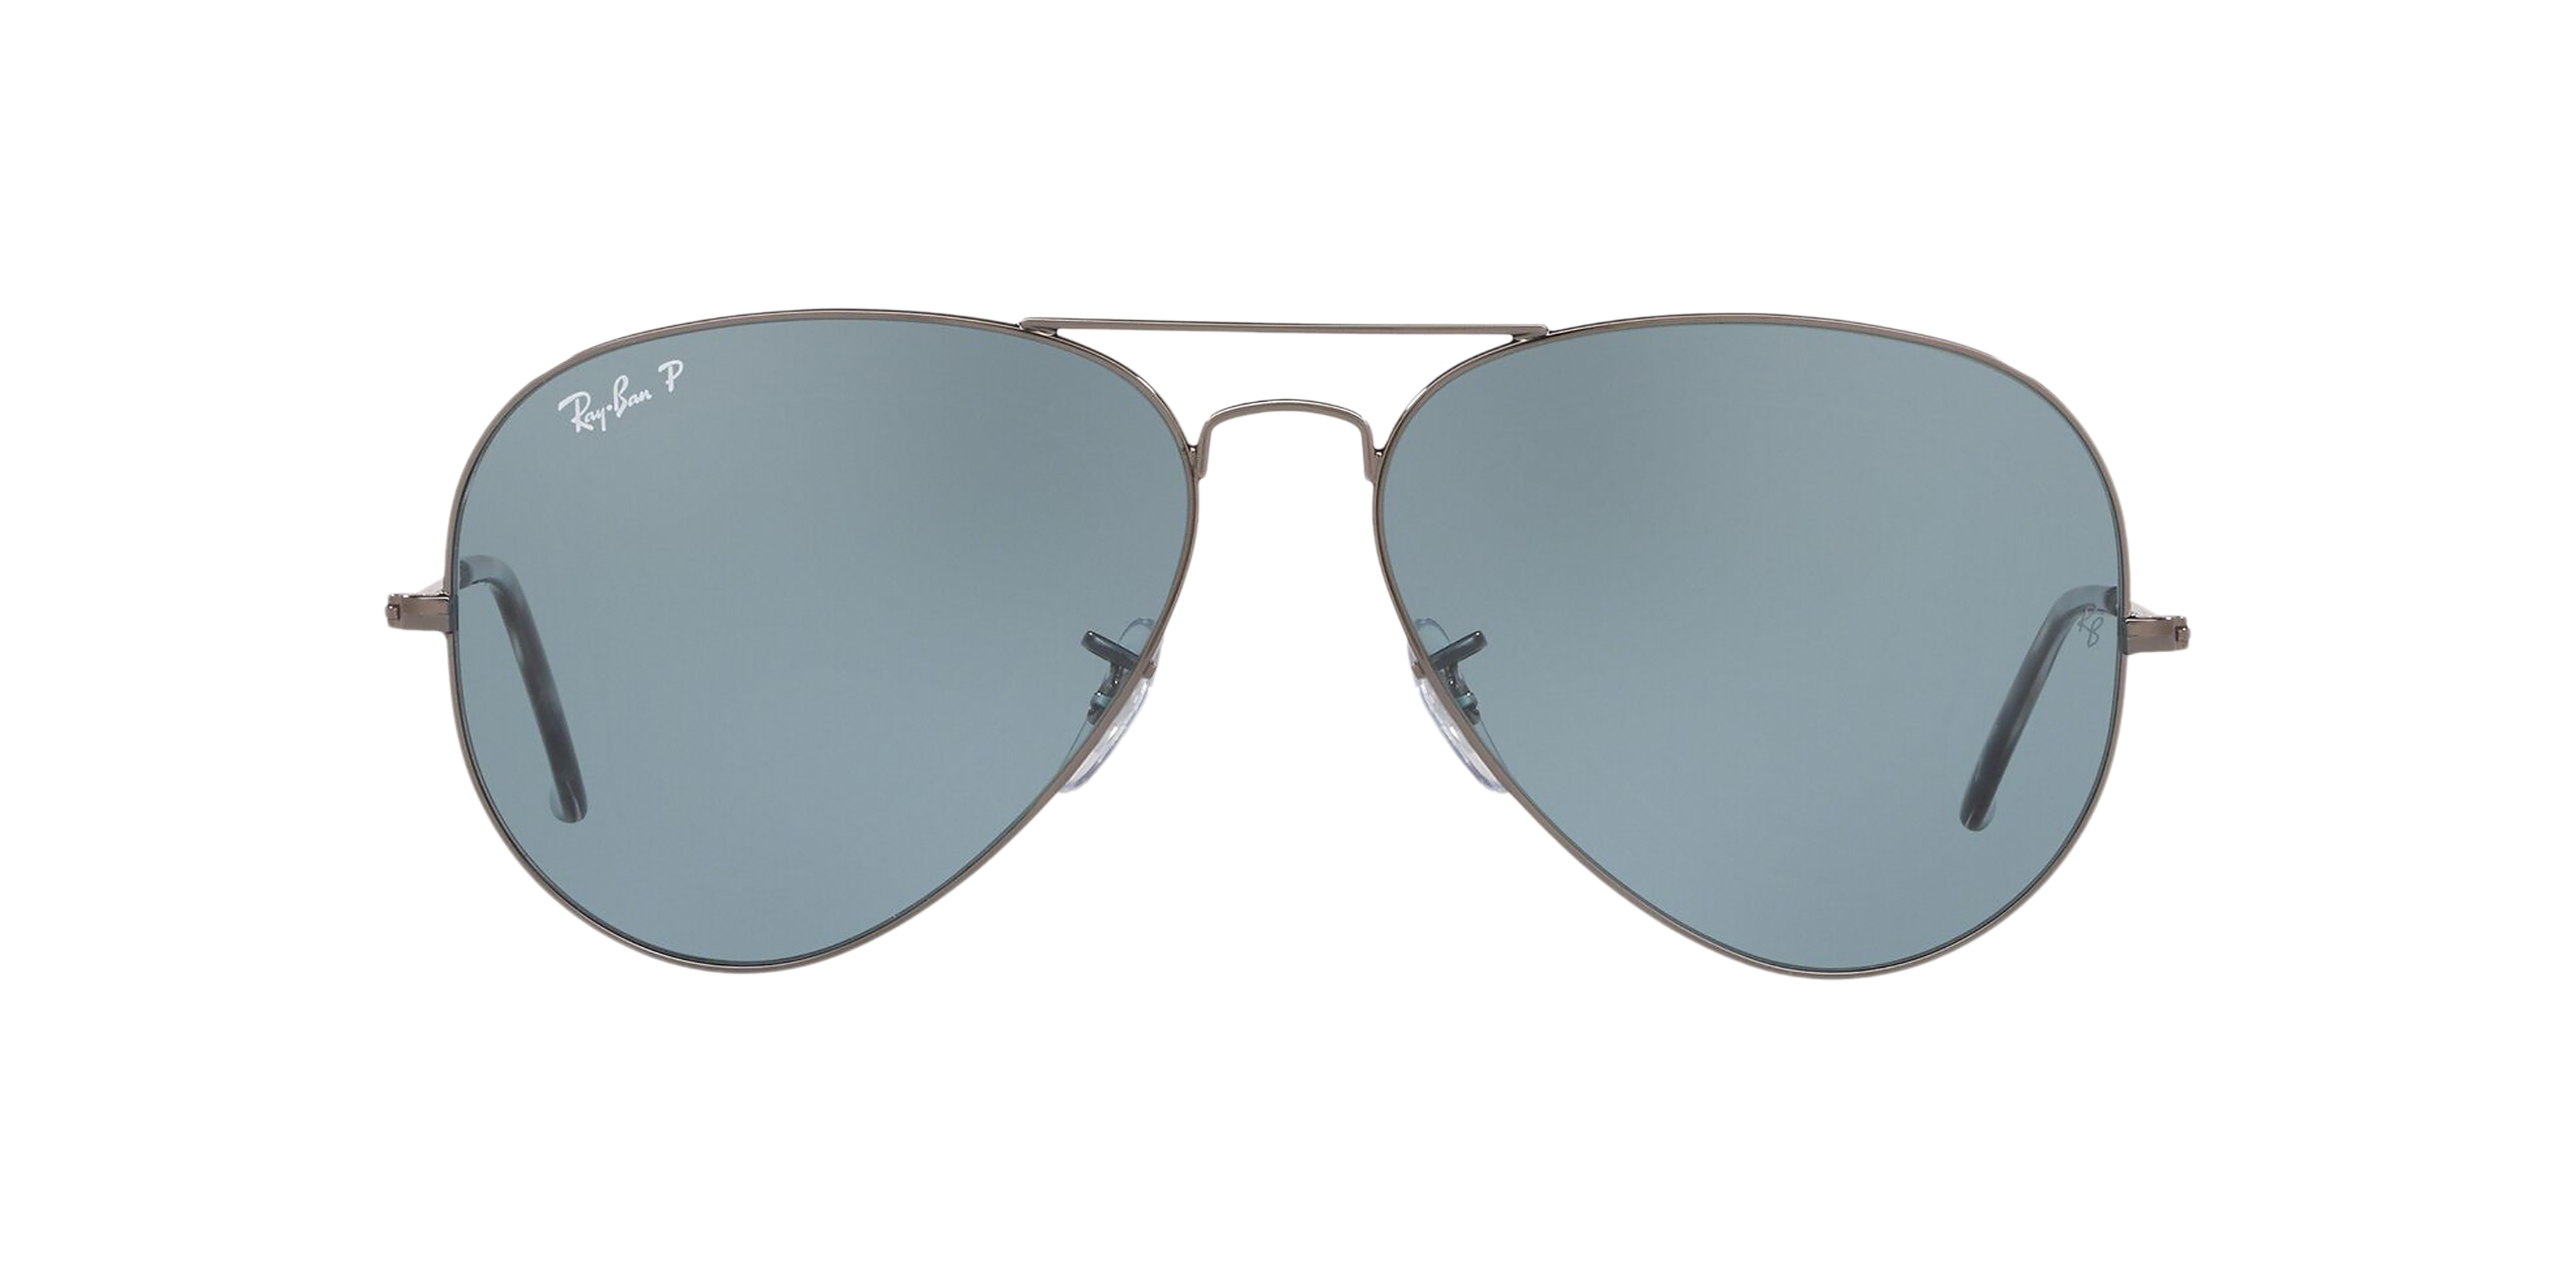 [products.image.front] Ray-Ban Aviator Classic RB3025 917152